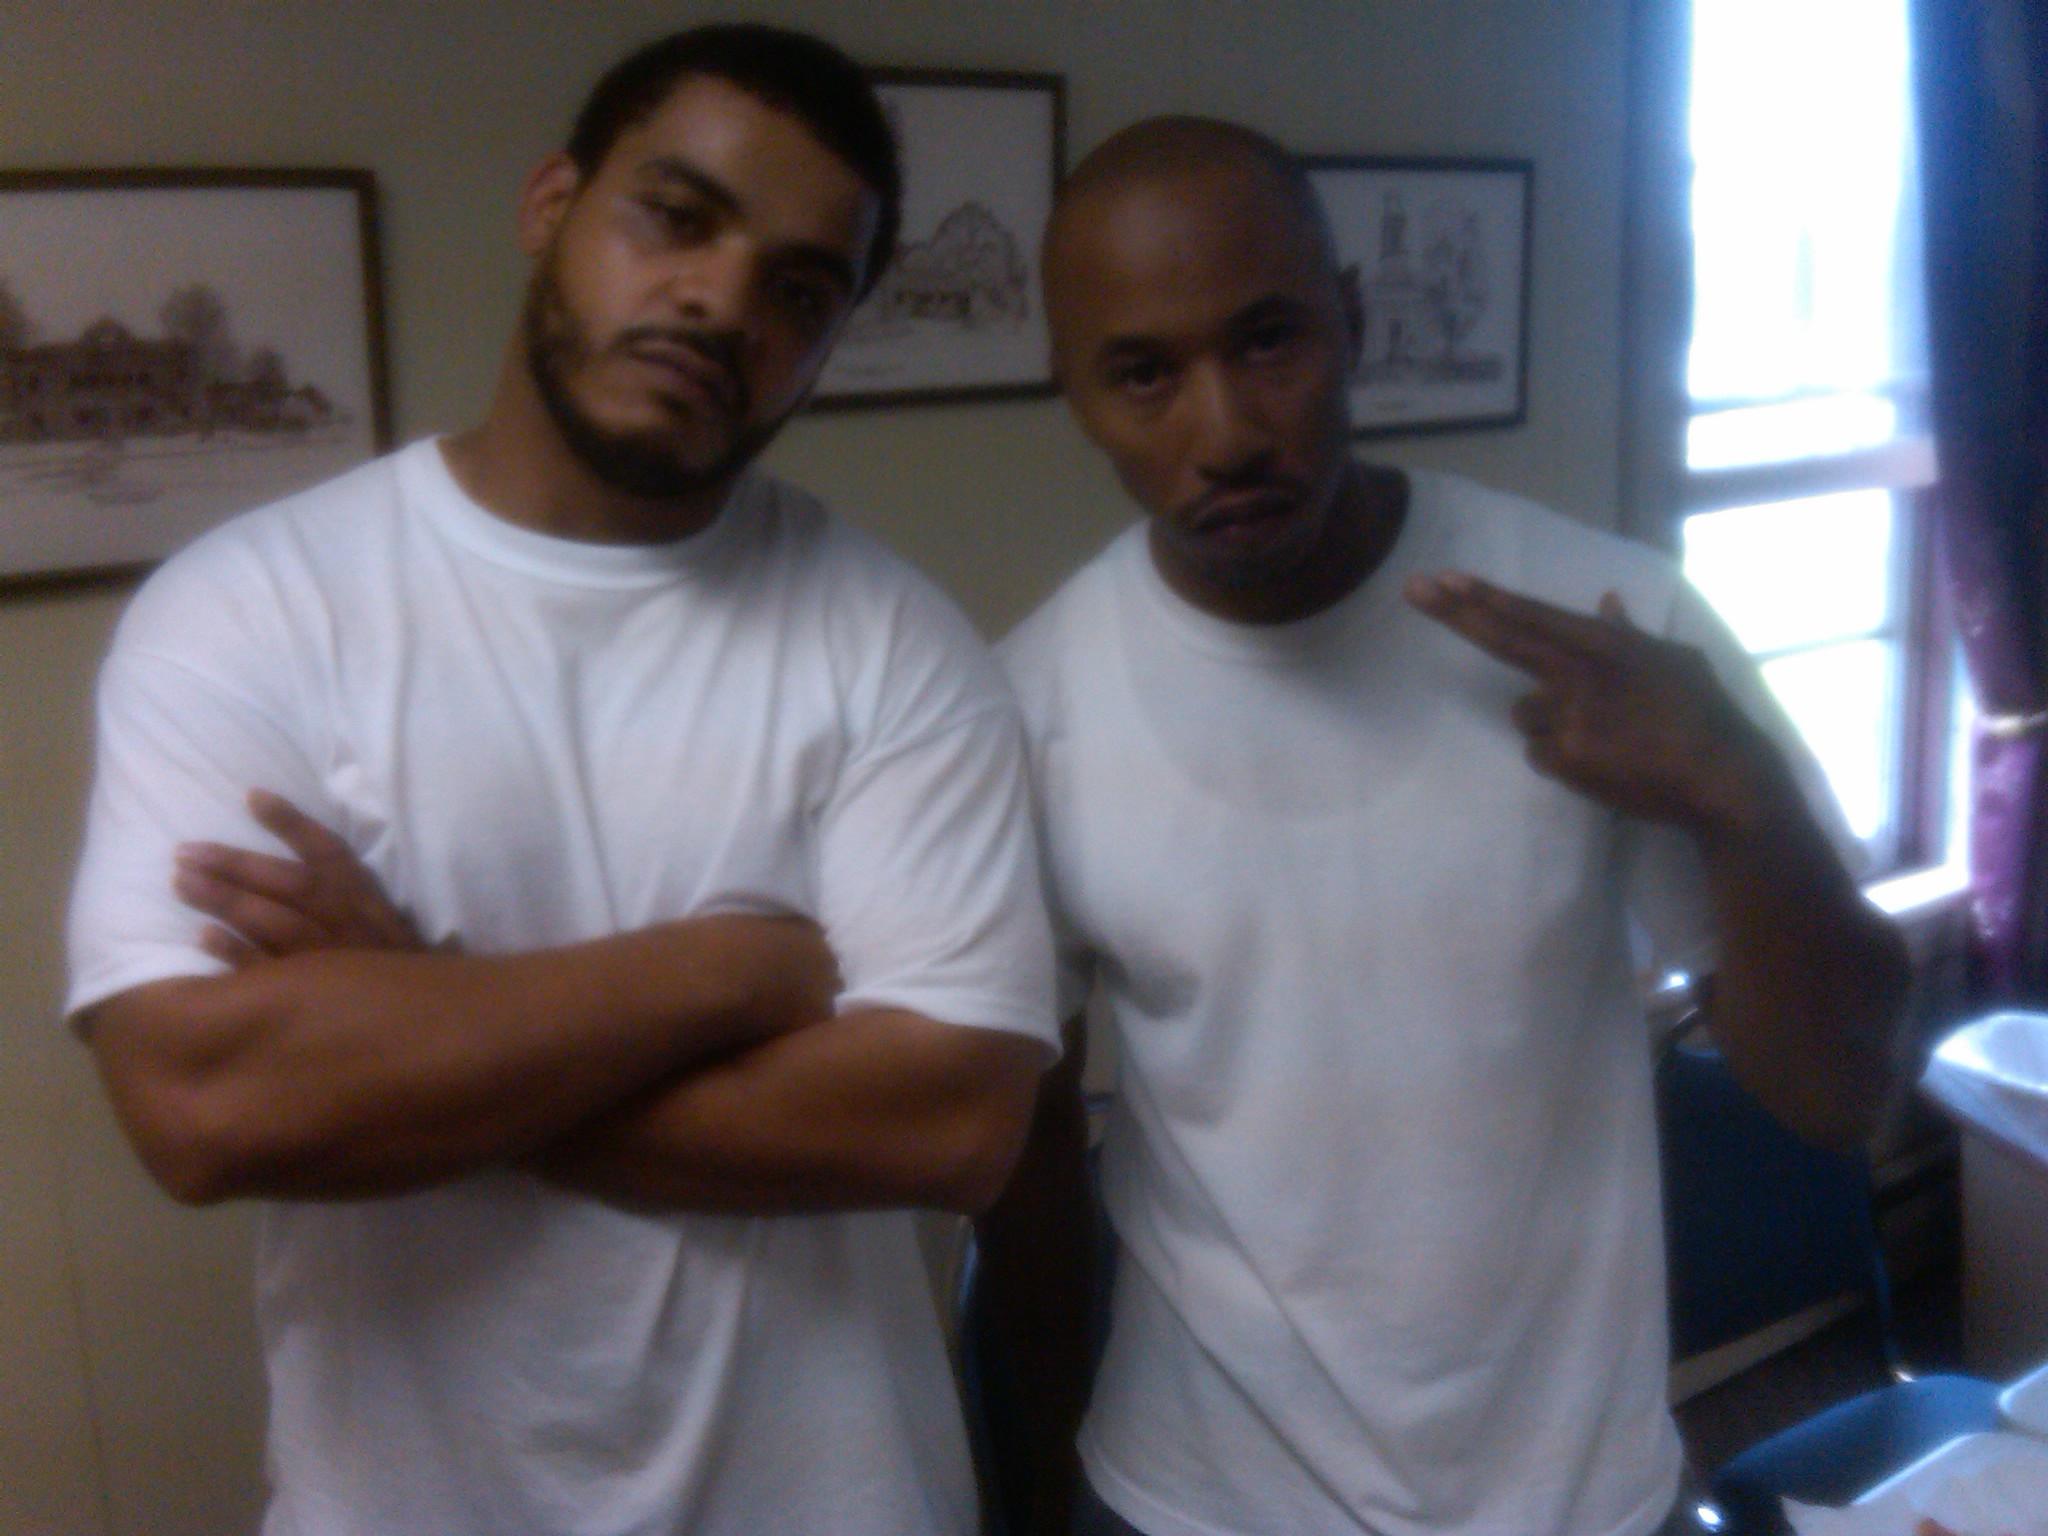 Luis Sanchez and Fredro Starr on set of 